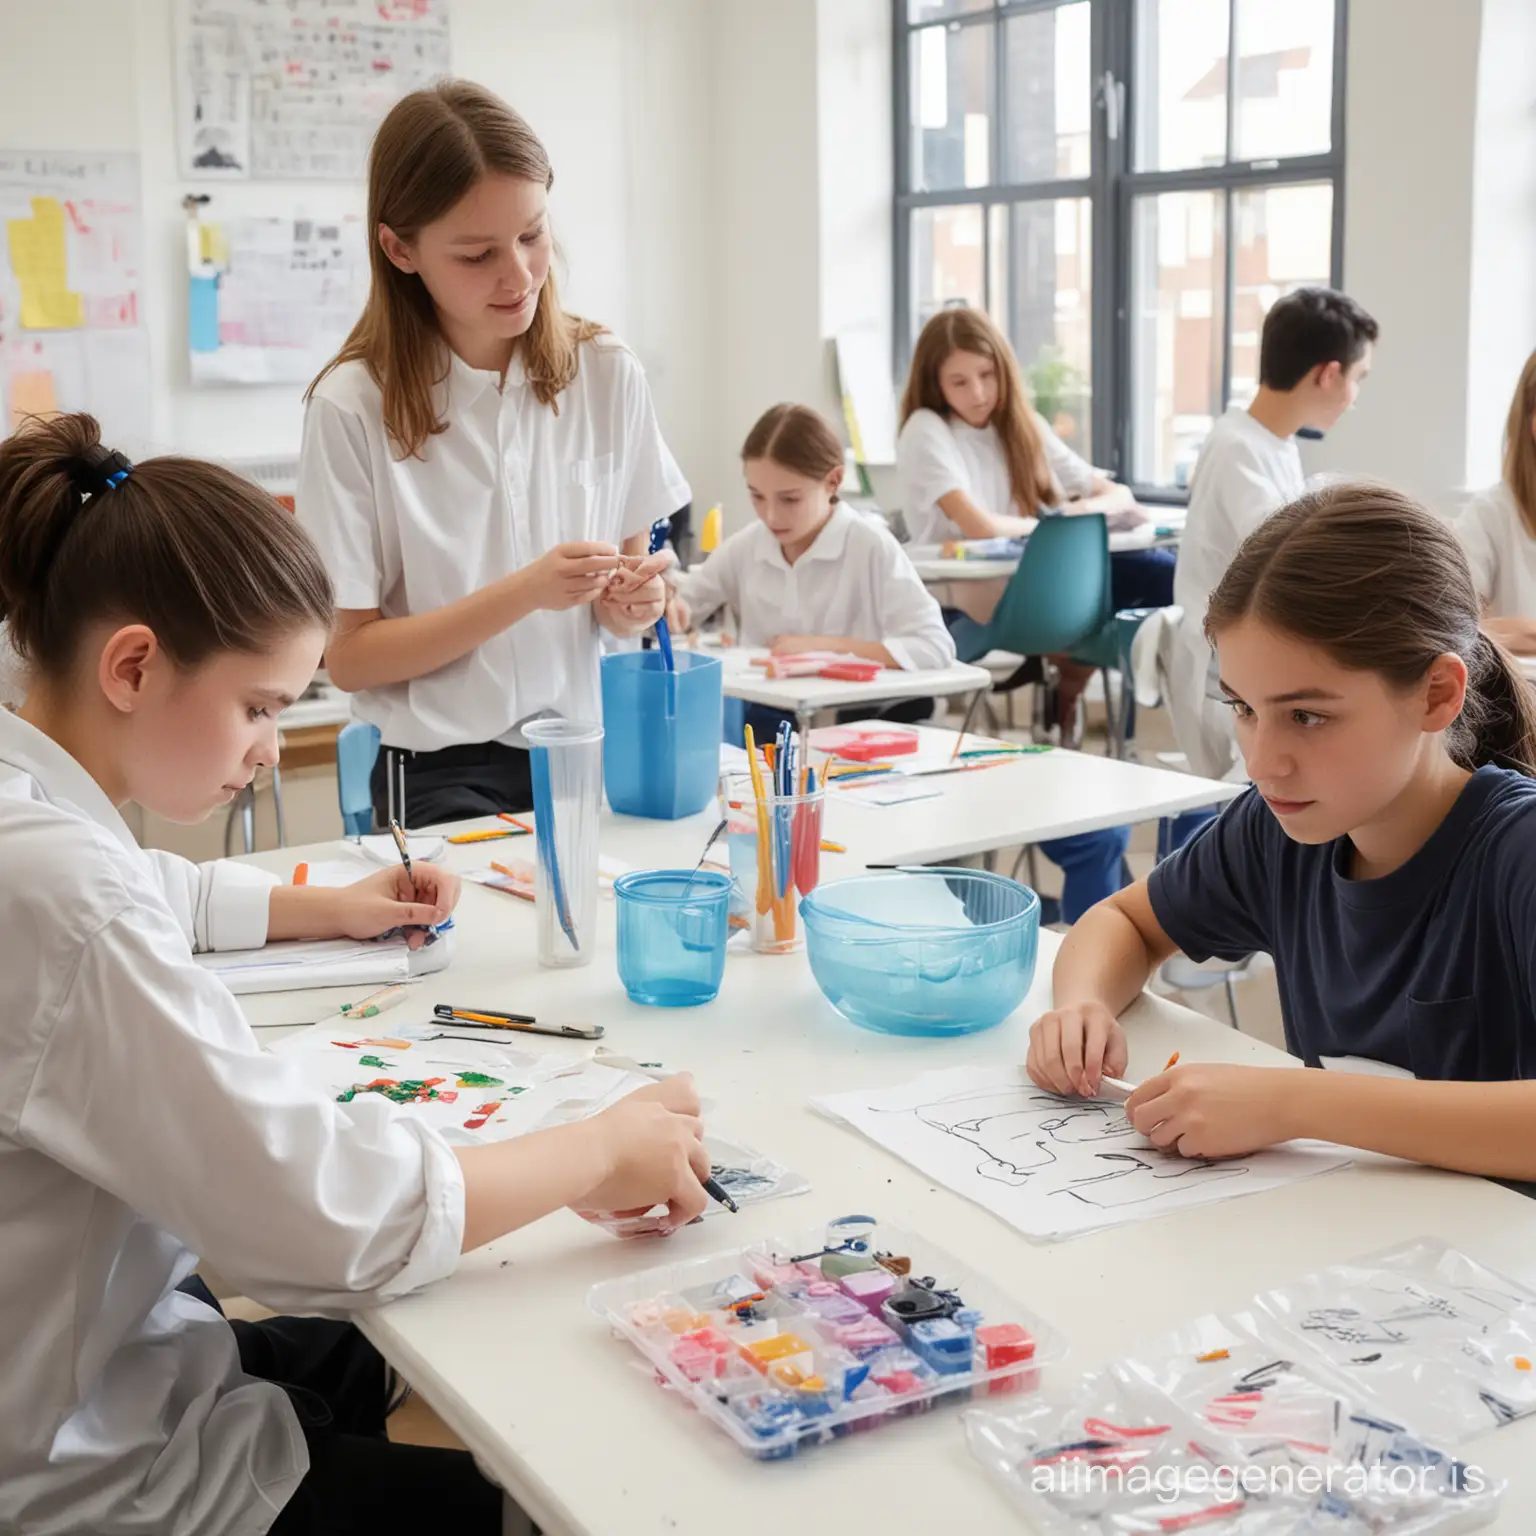 Students aged 14 in a plastic arts class